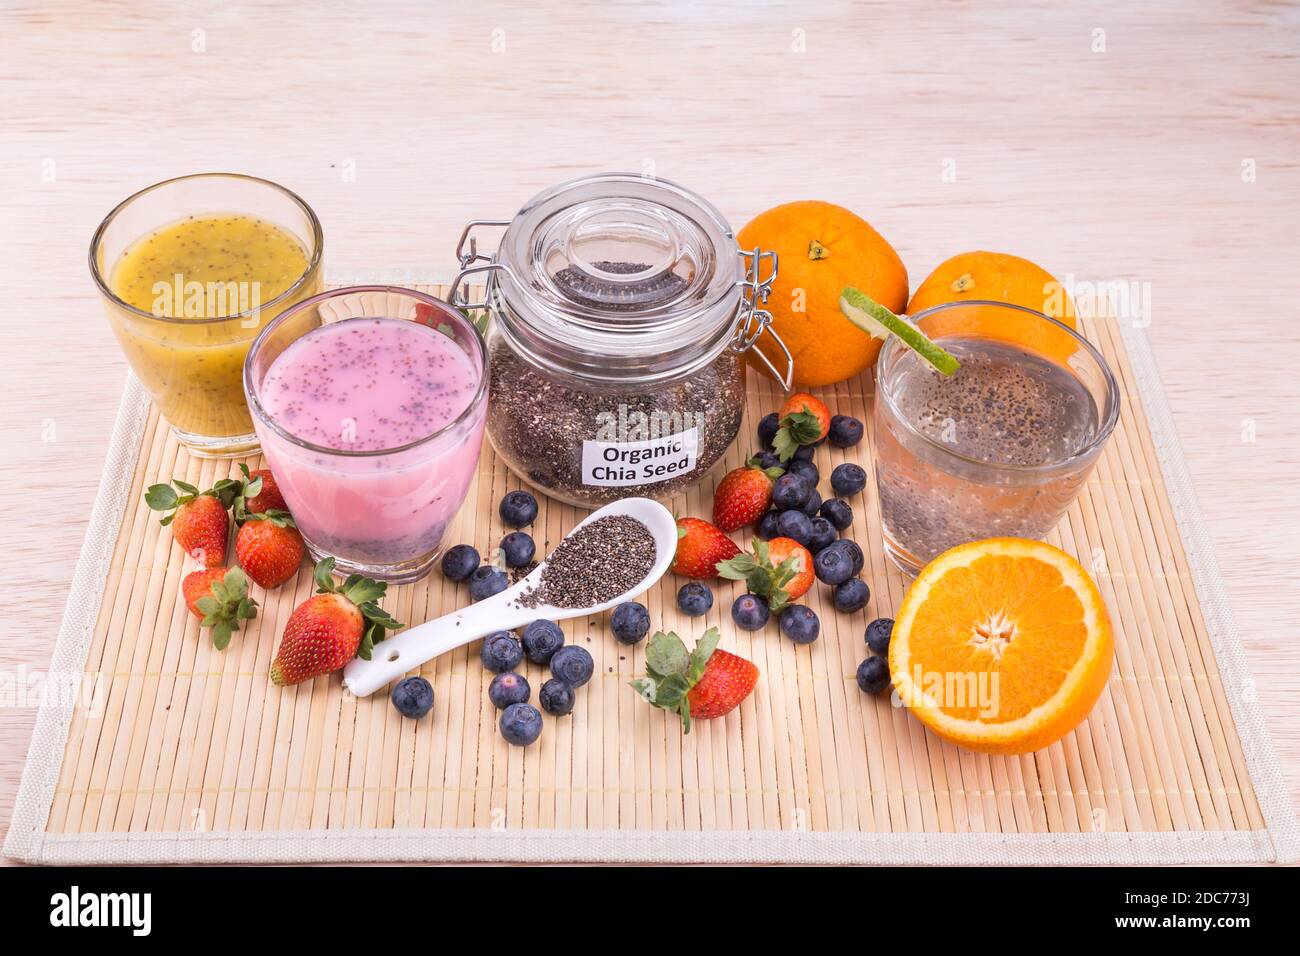 Chia seeds with fresh fruits juice, healthy nutritious anti-oxidant superfood drinks Stock Photo